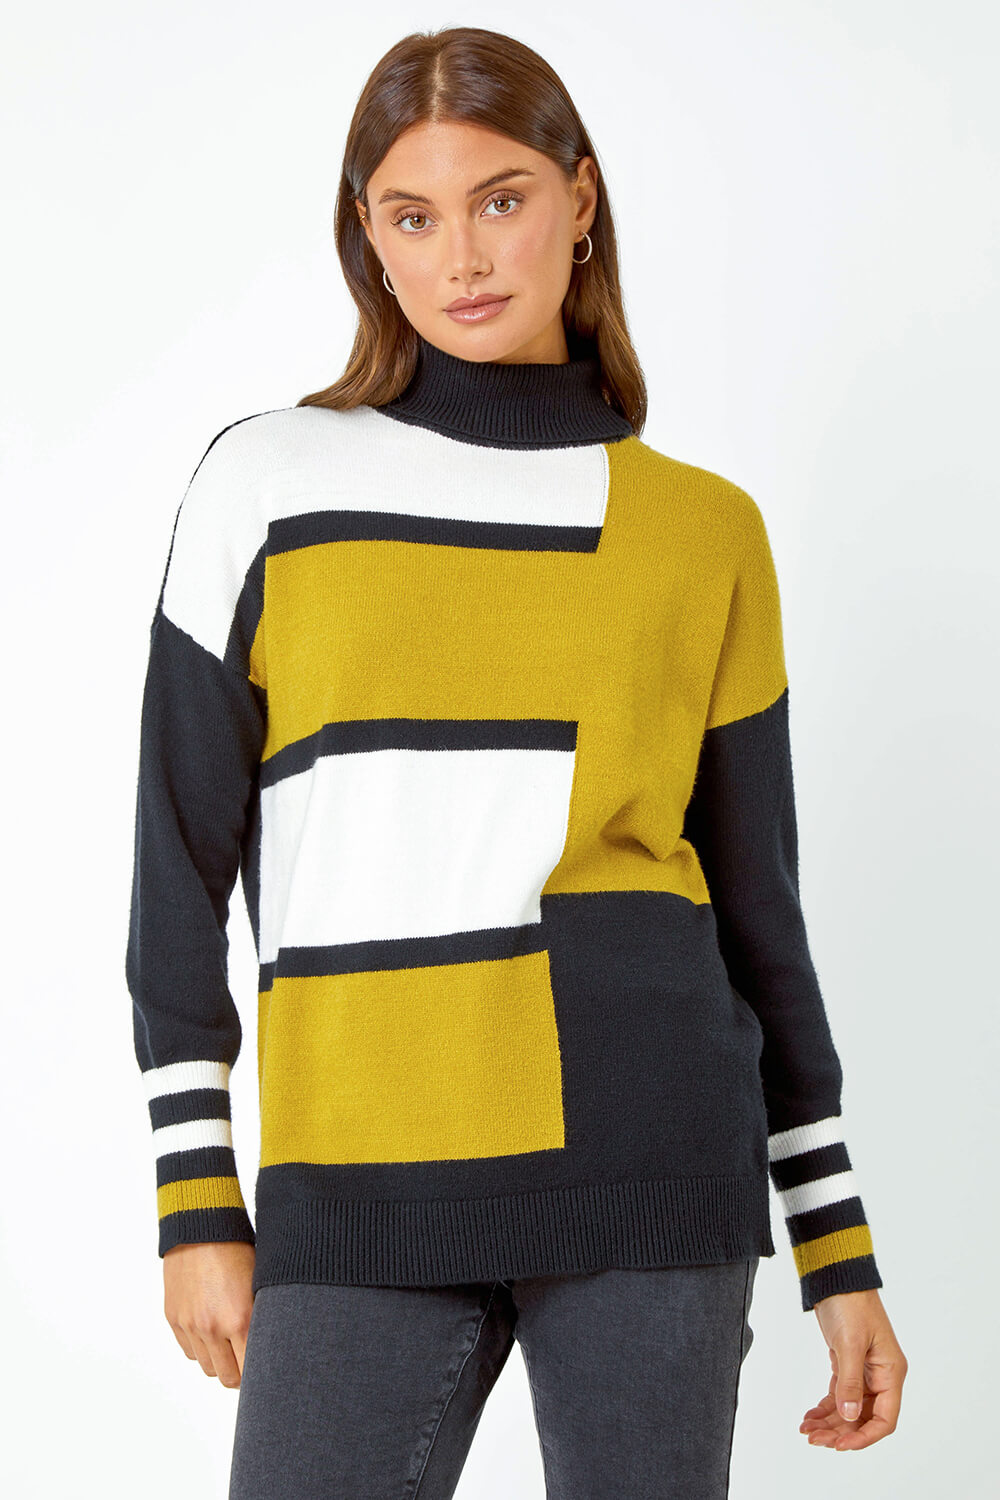 Multi  Colour Block Knitted Jumper, Image 4 of 5